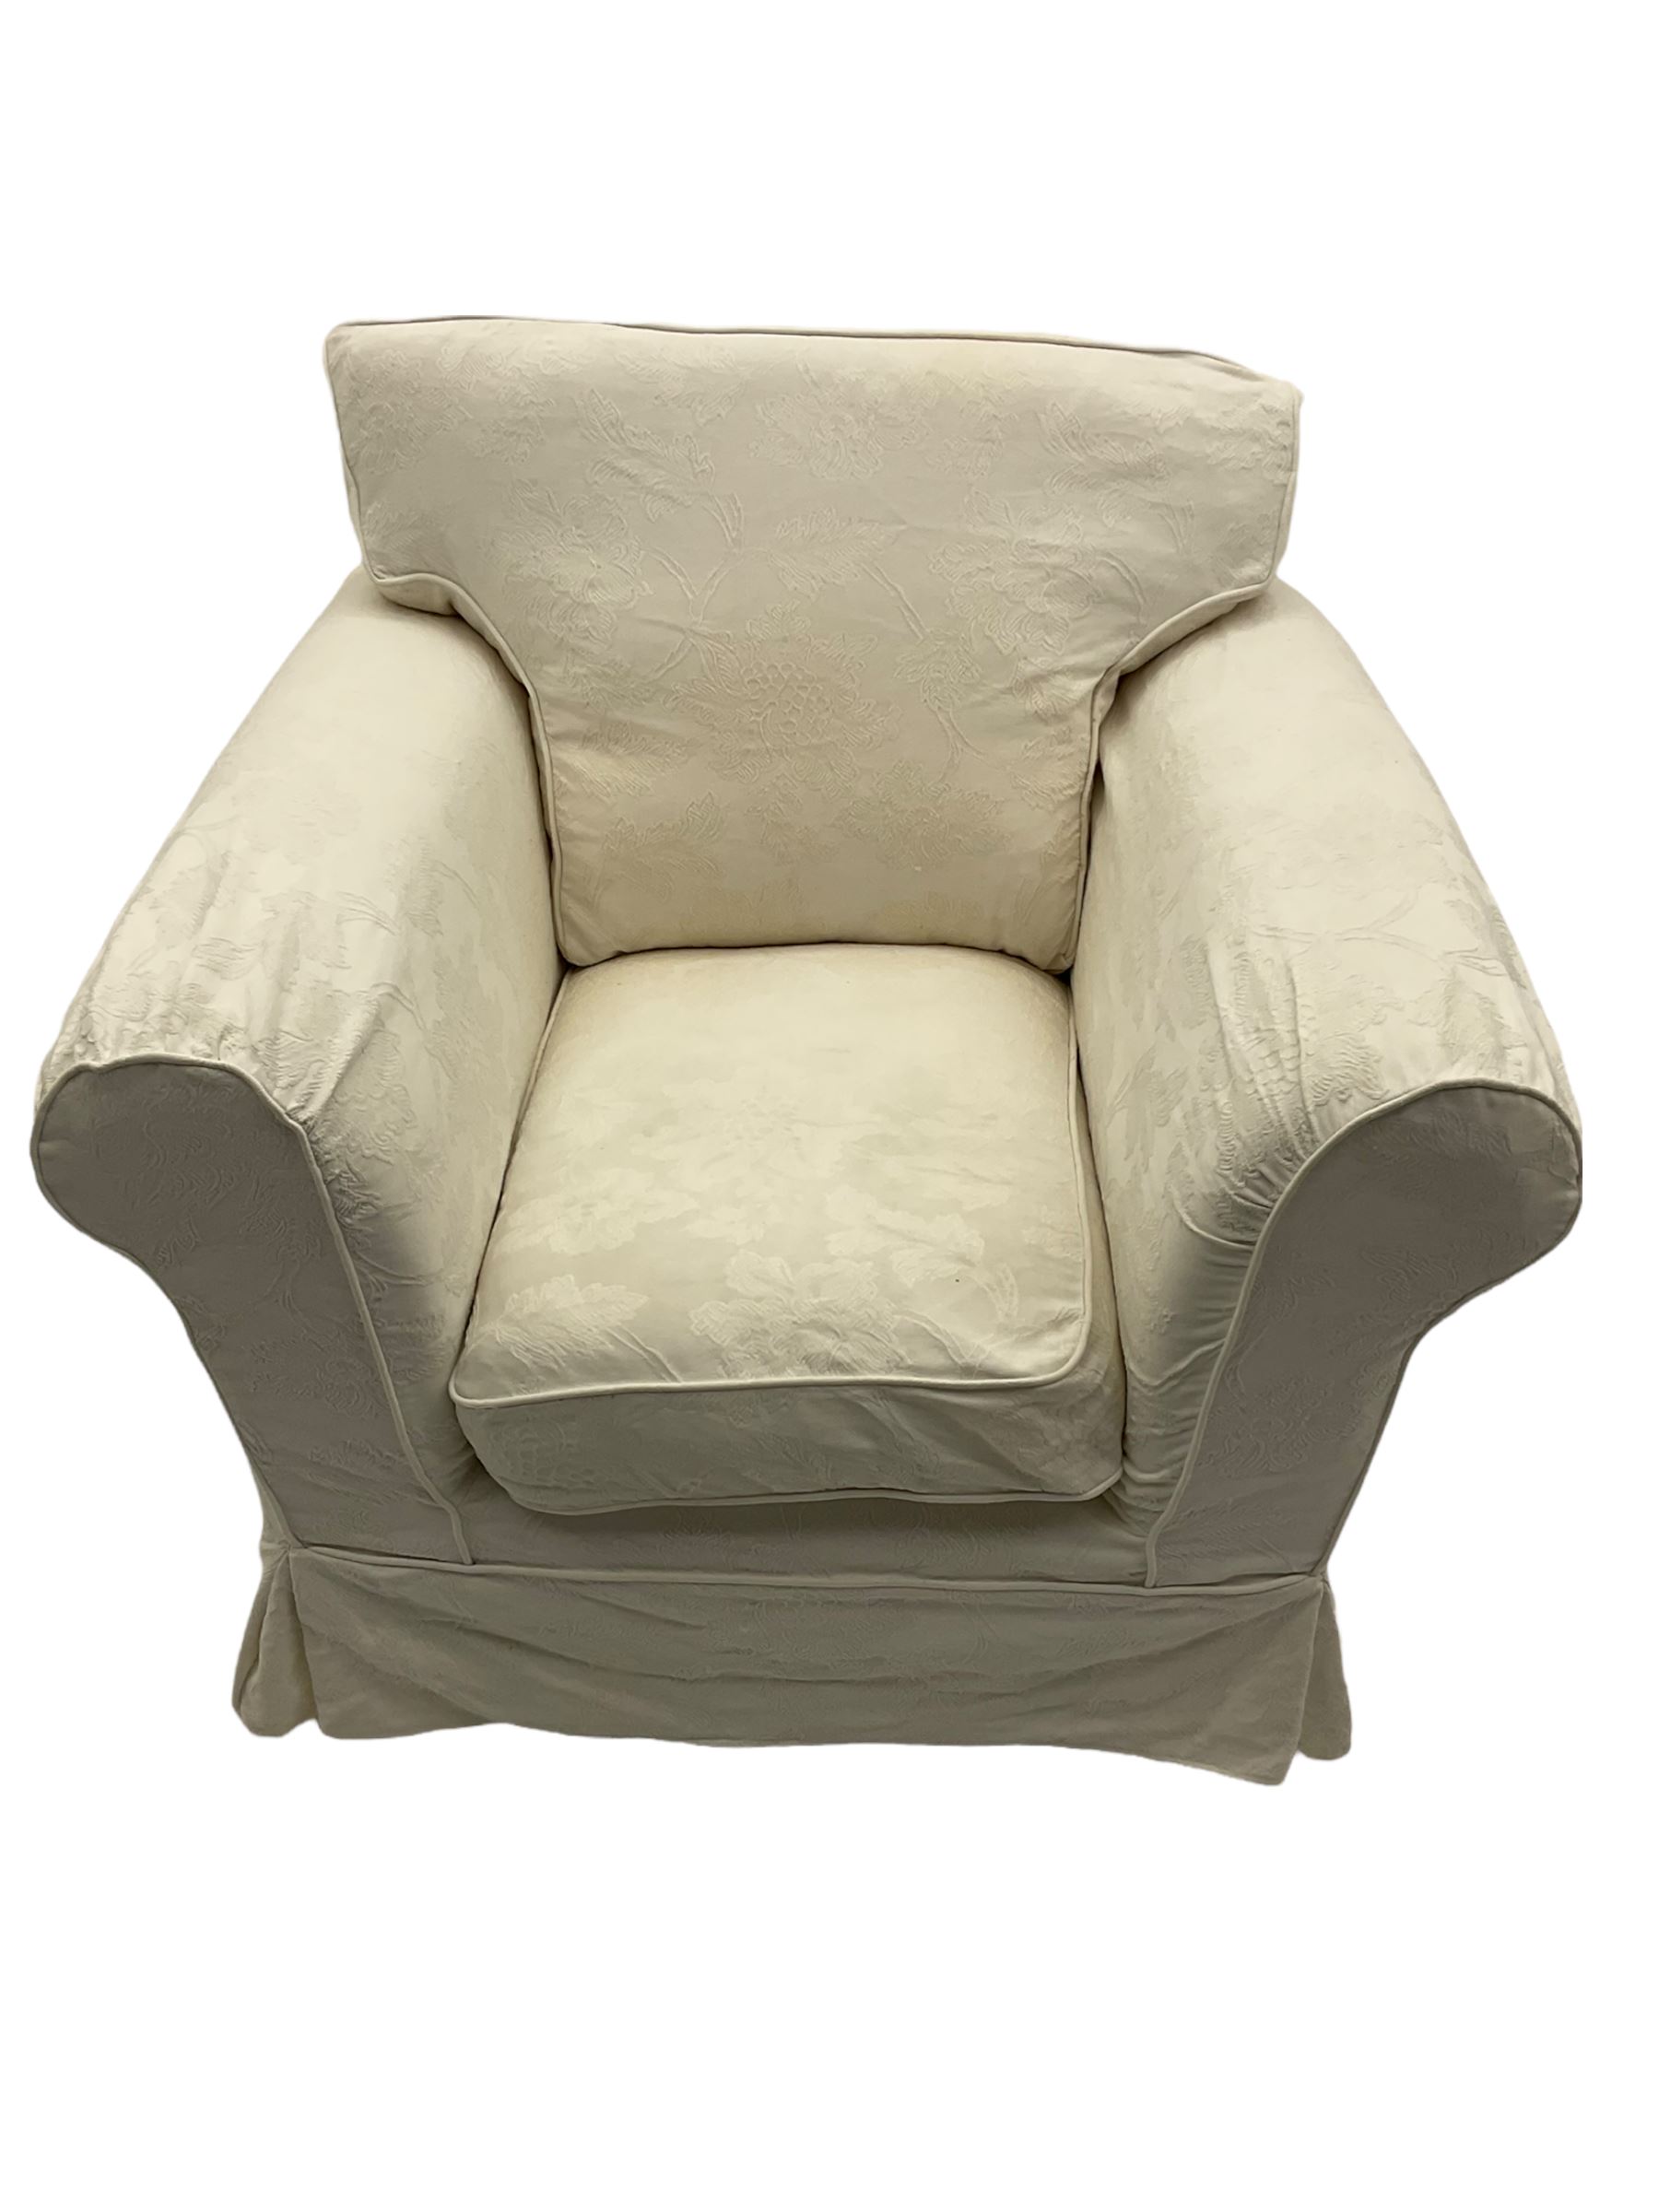 Traditional shaped armchair upholstered in white patterned loose cover